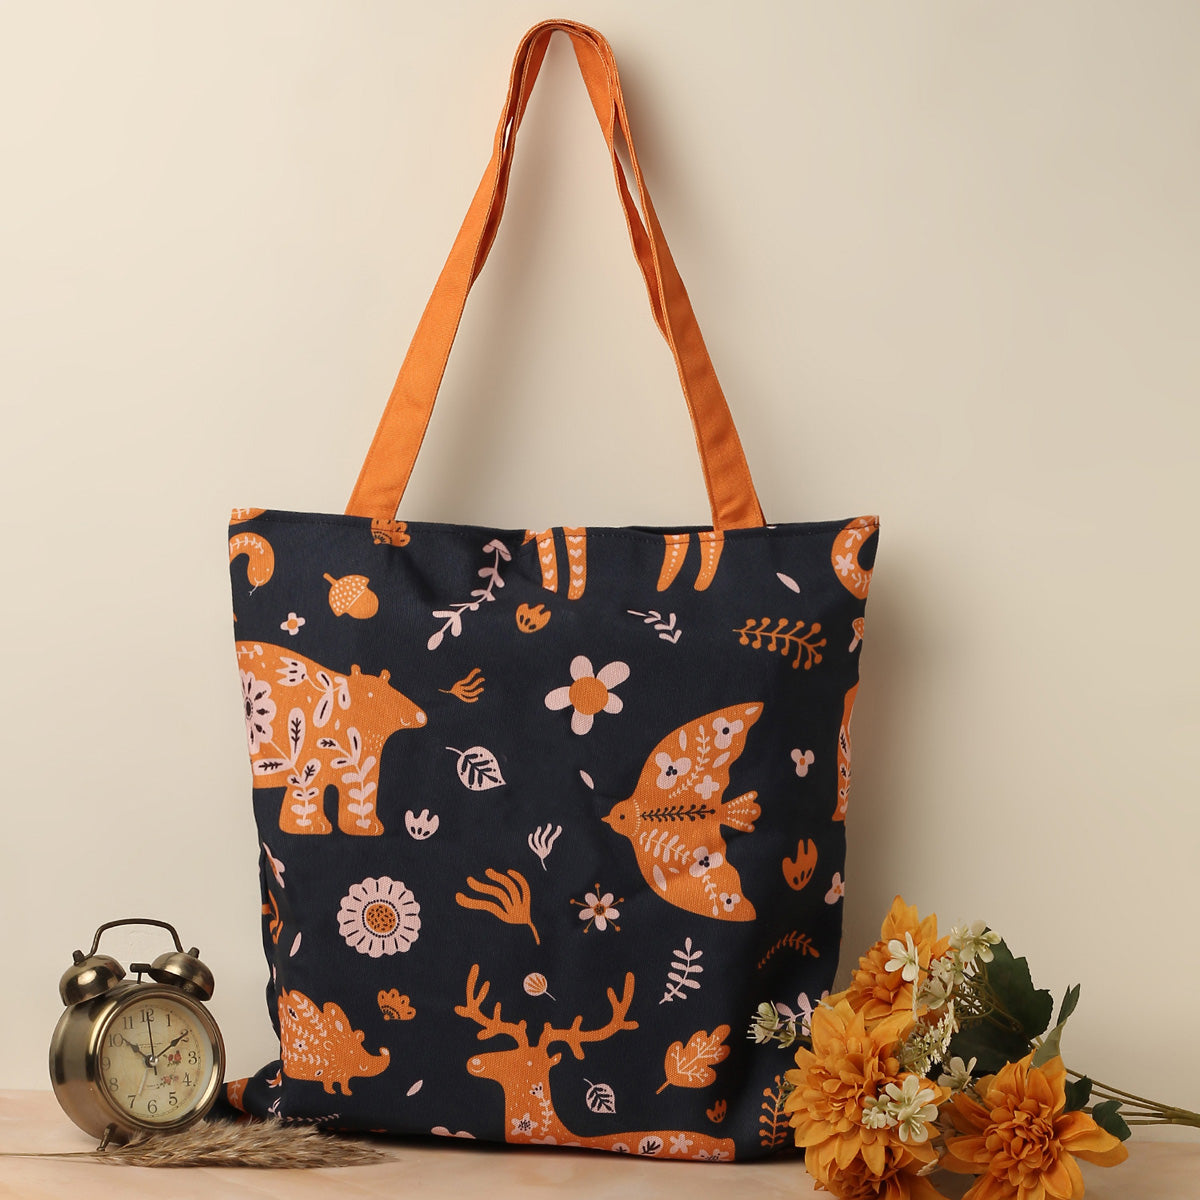 A navy blue tote bag with an orange strap and various orange and white animal and floral designs, accompanied by an alarm clock and a bunch of orange flowers on the side.